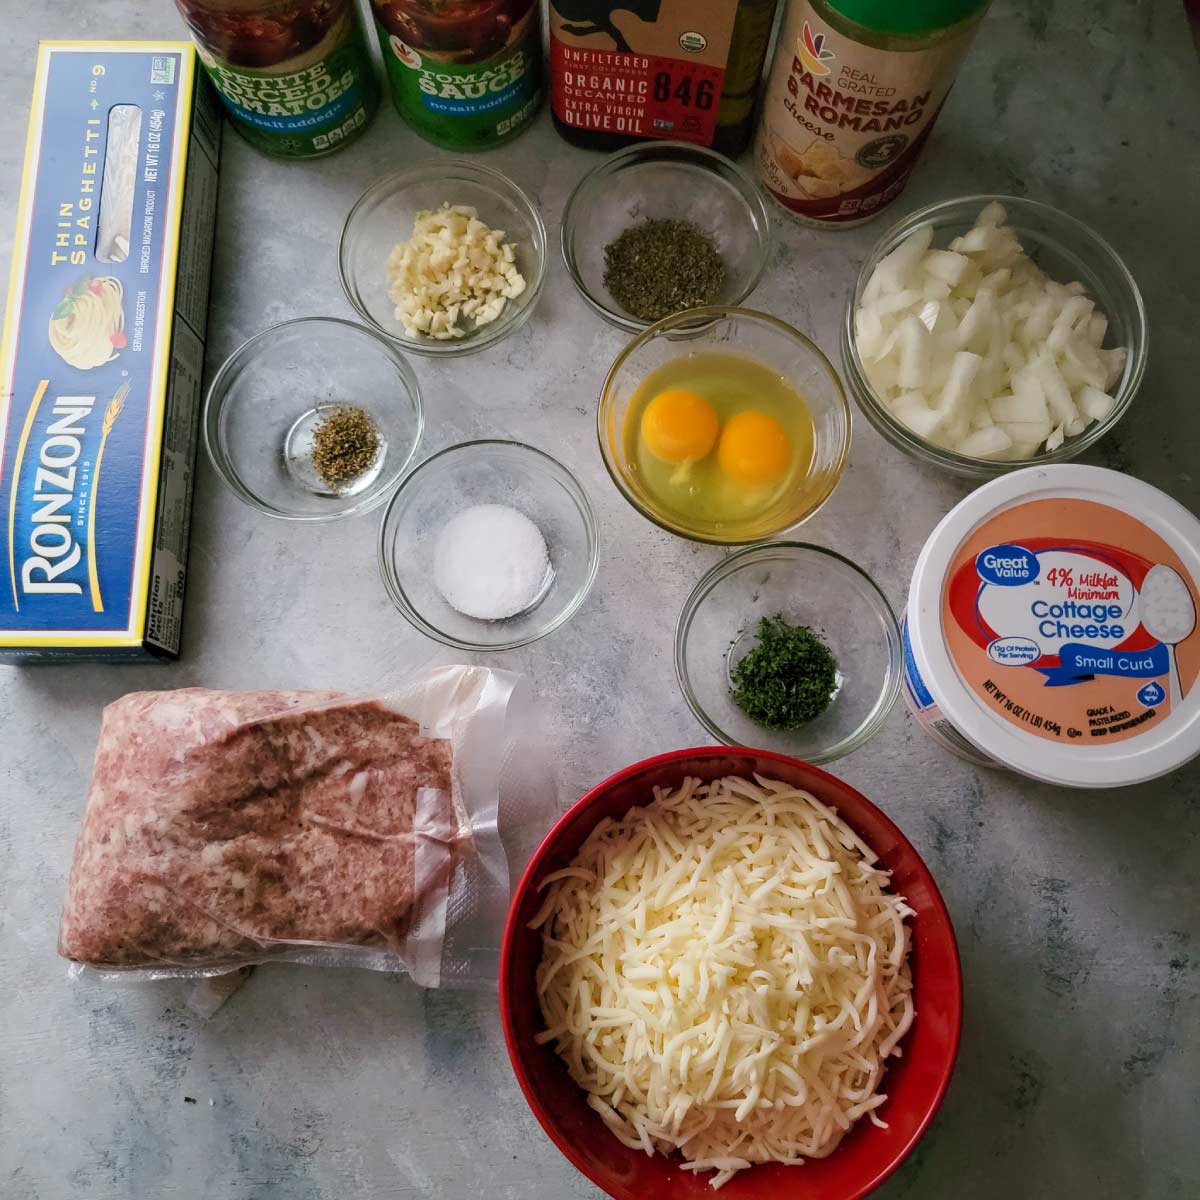 Ingredients displayed for making the baked spaghetti.